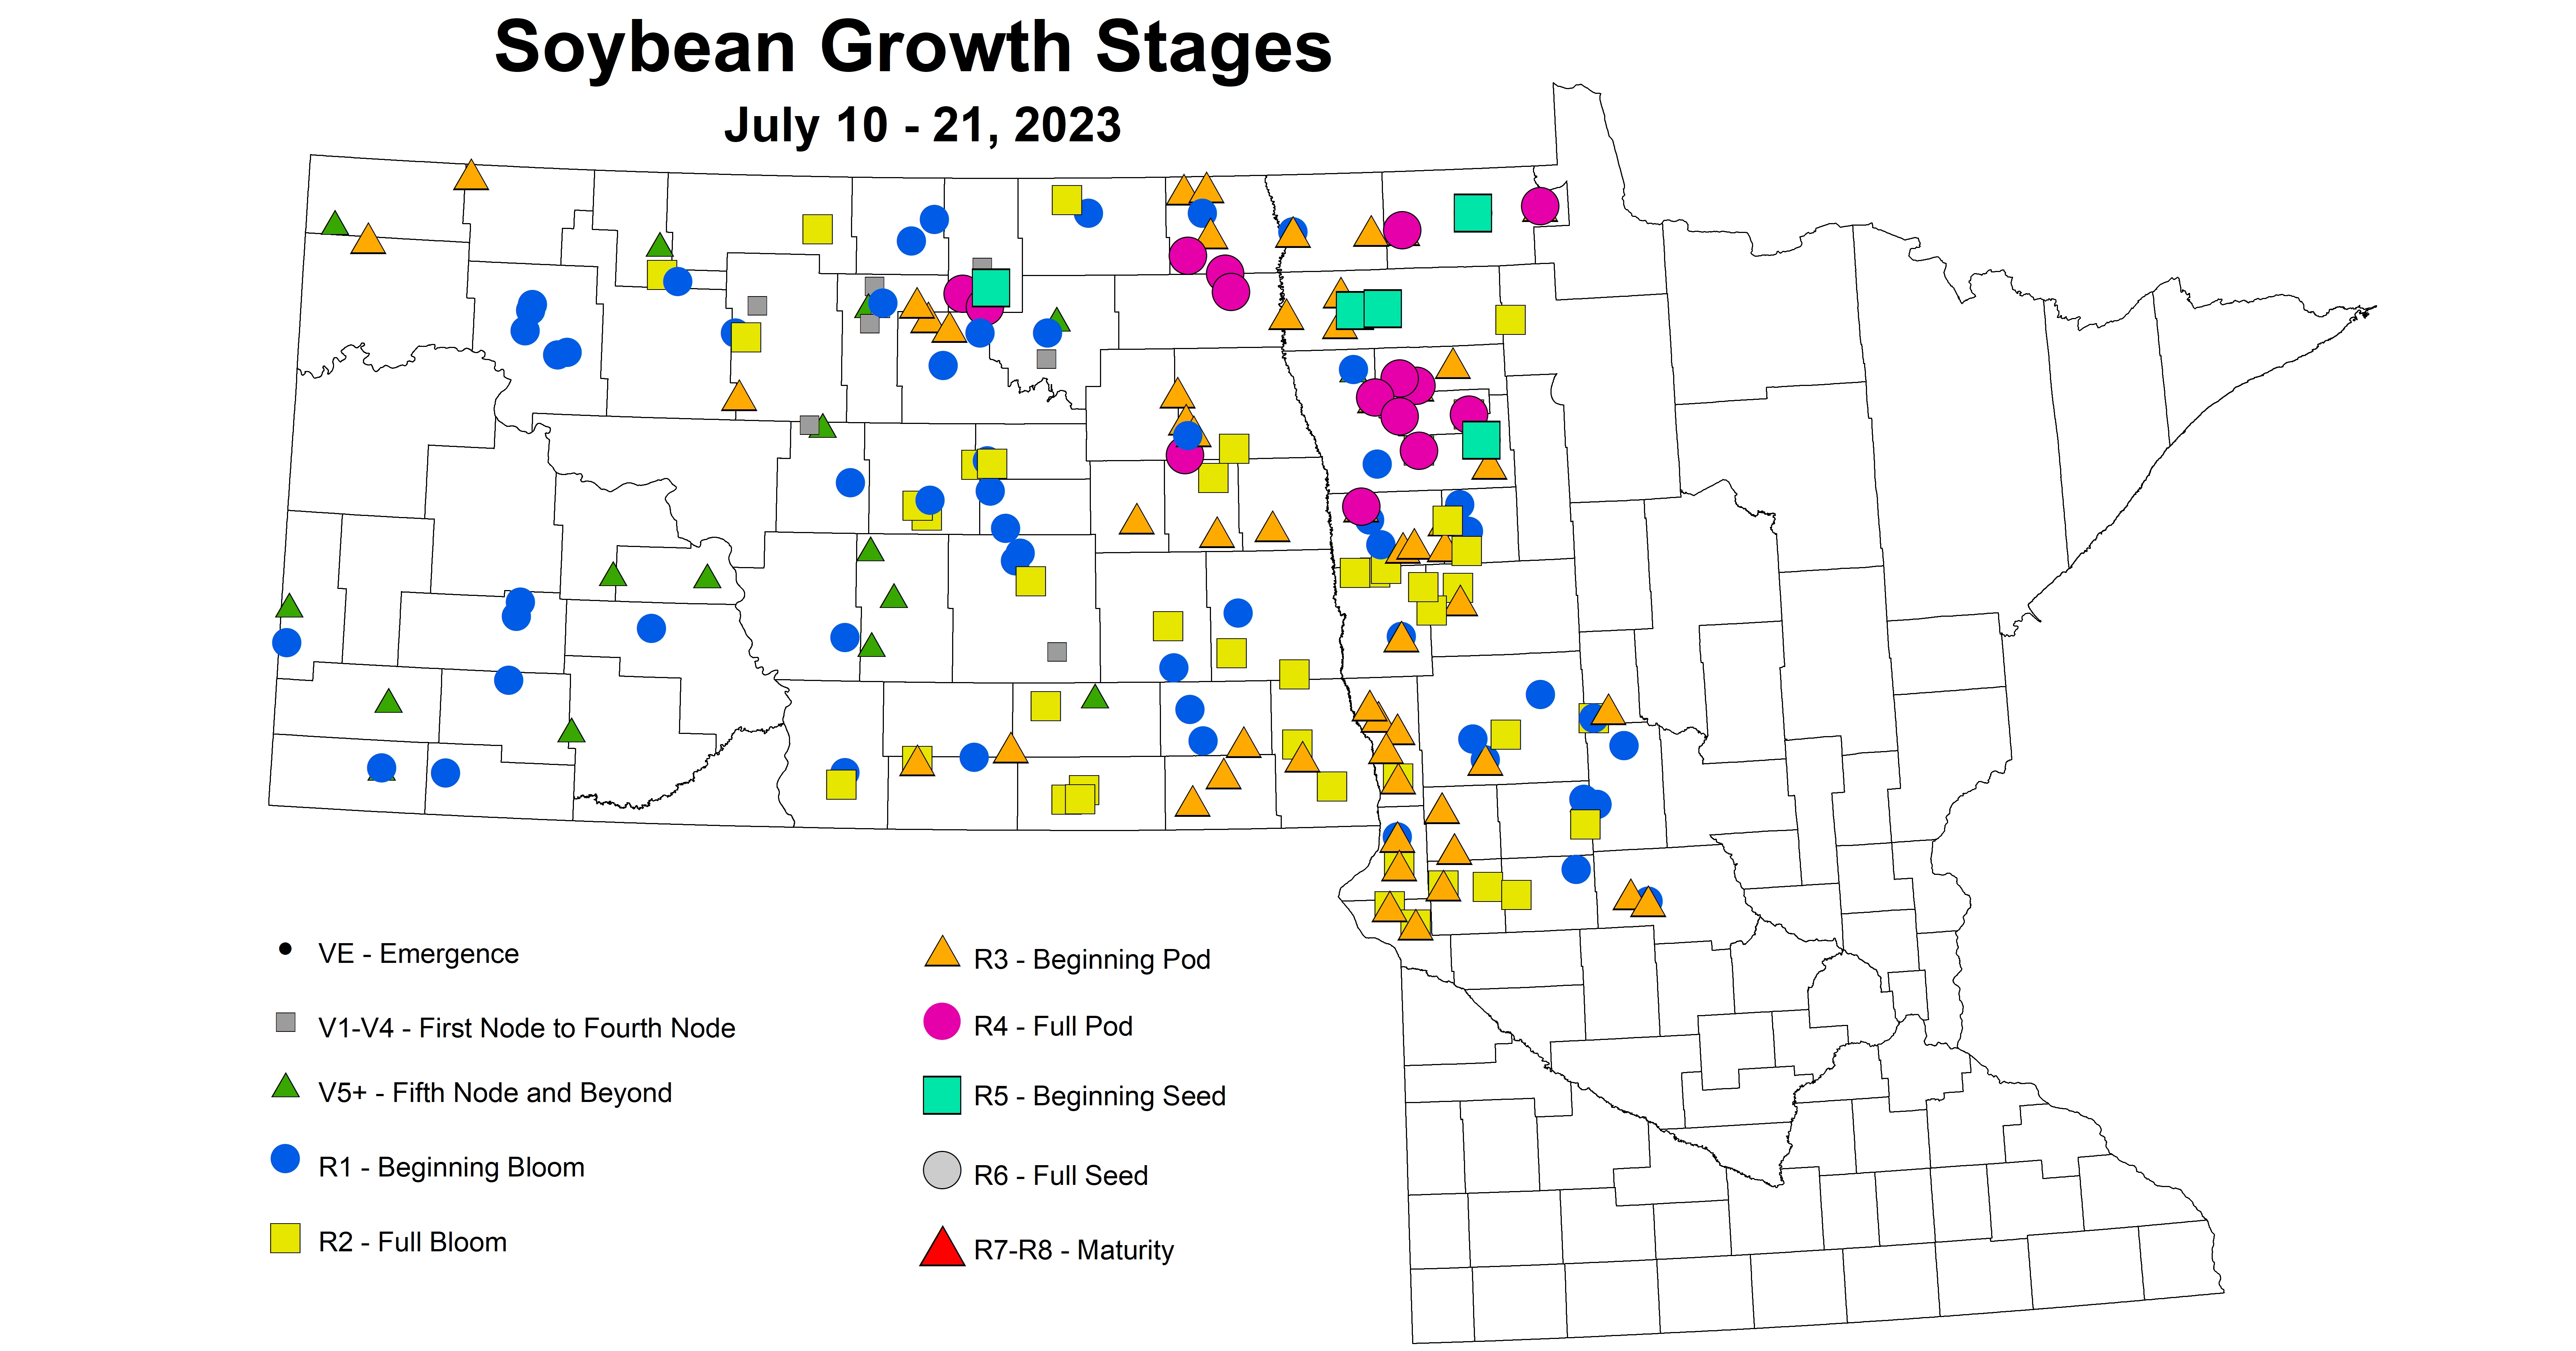 soybean growth stages July 10-21 2023